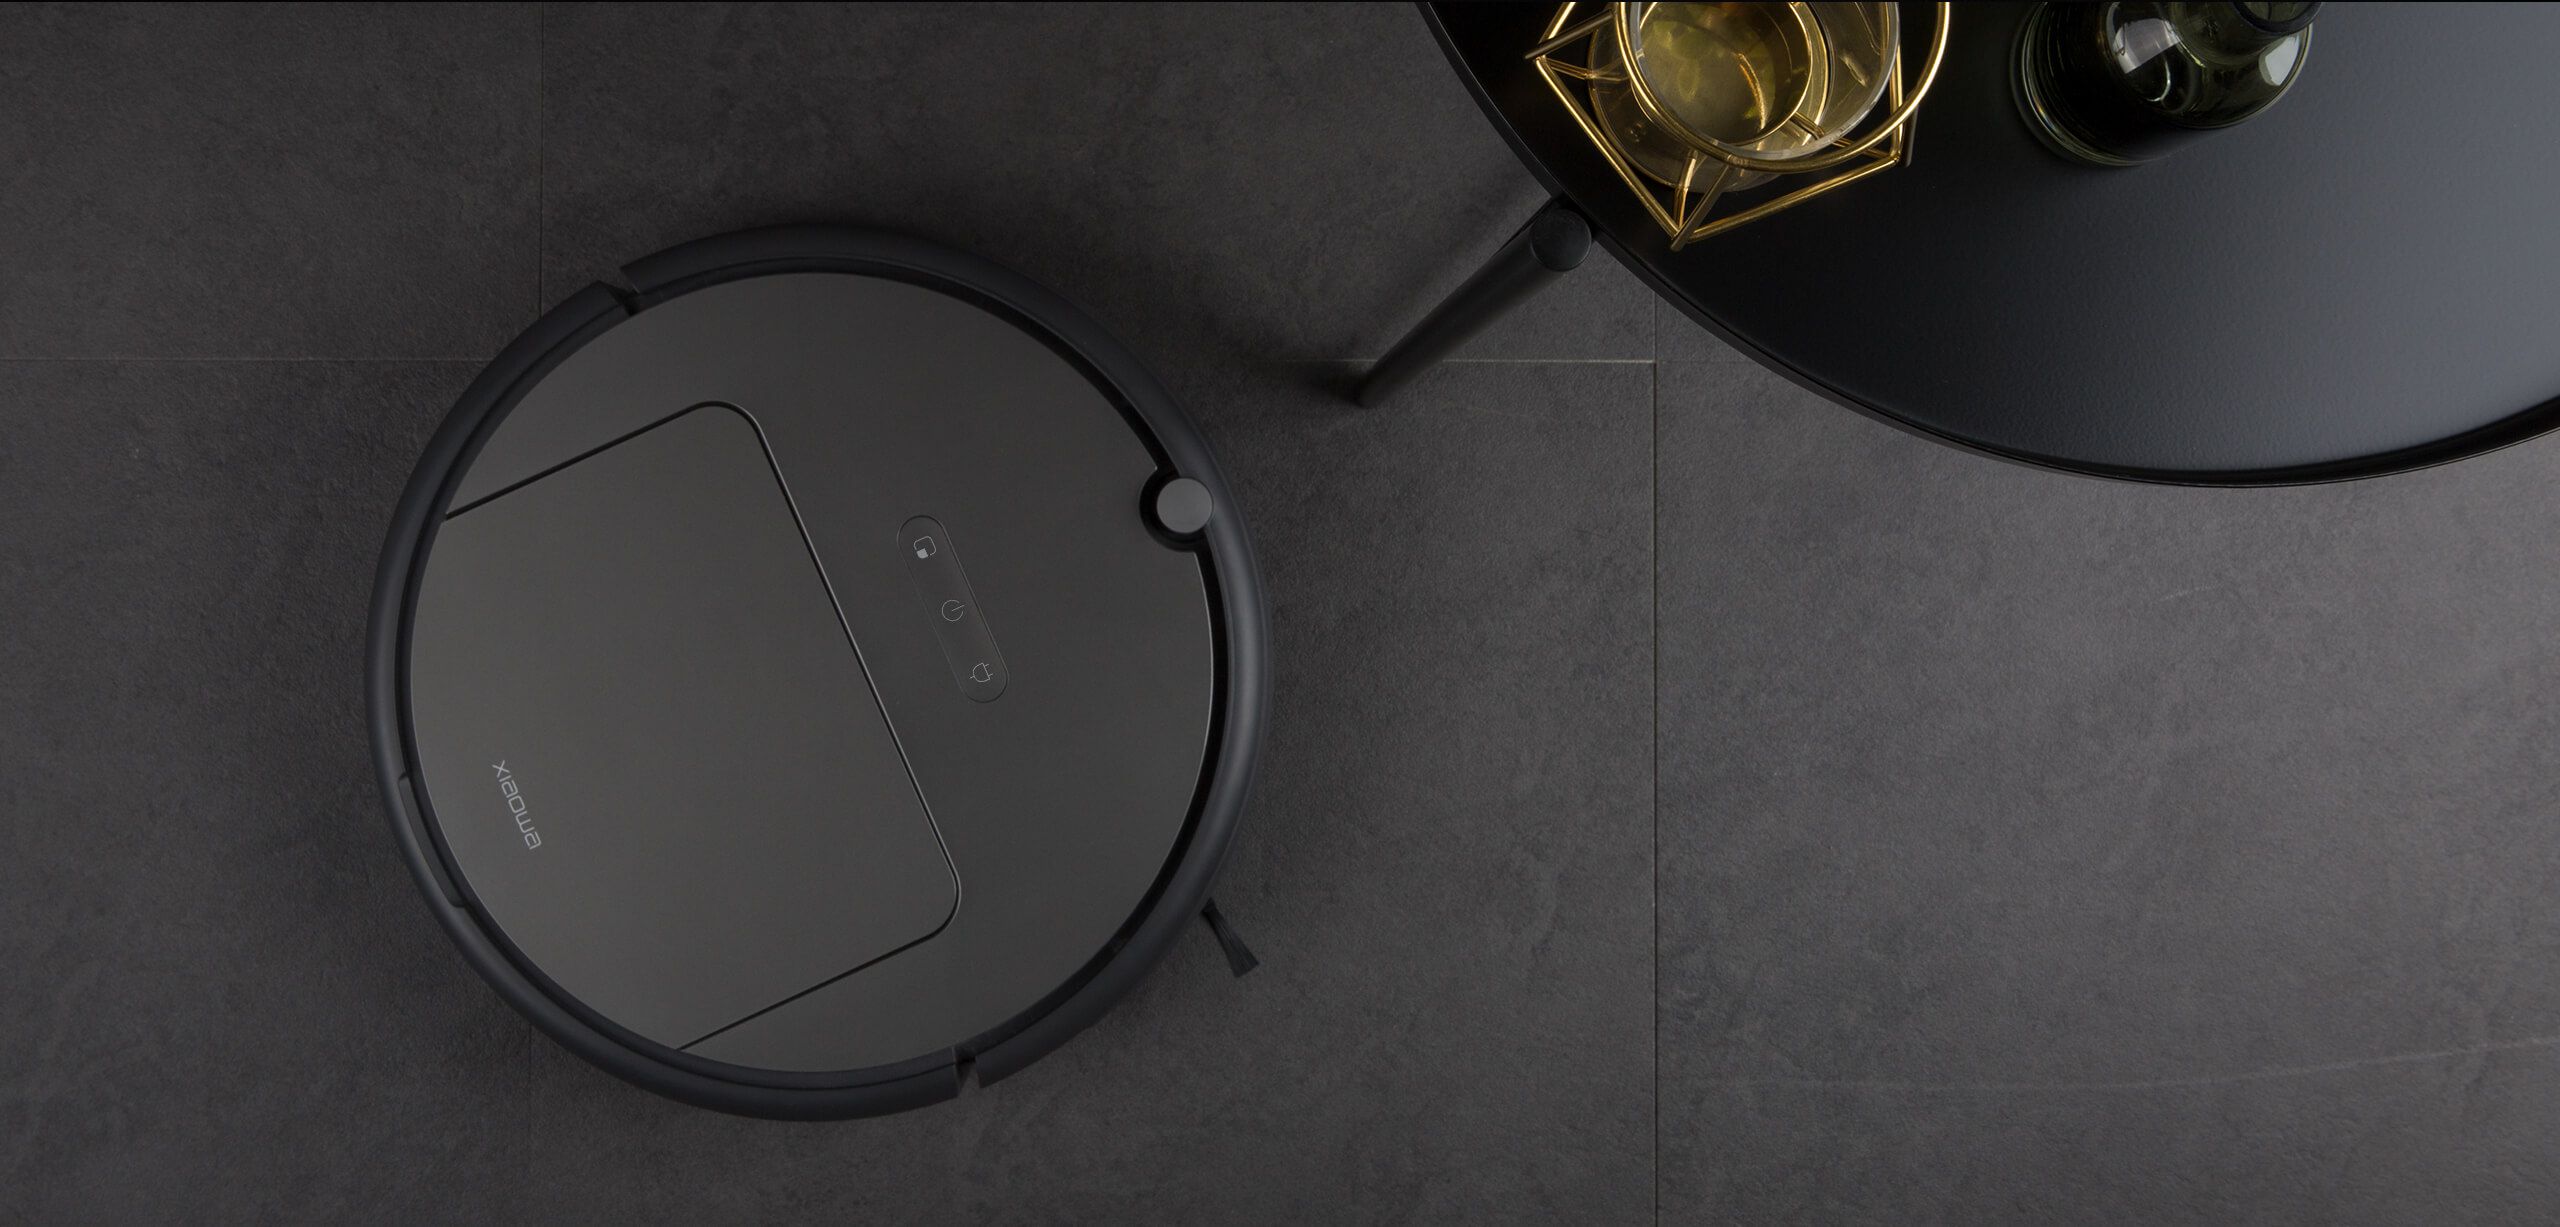 Thinking of buying a robot vacuum the Roborock E35is ideal image 5